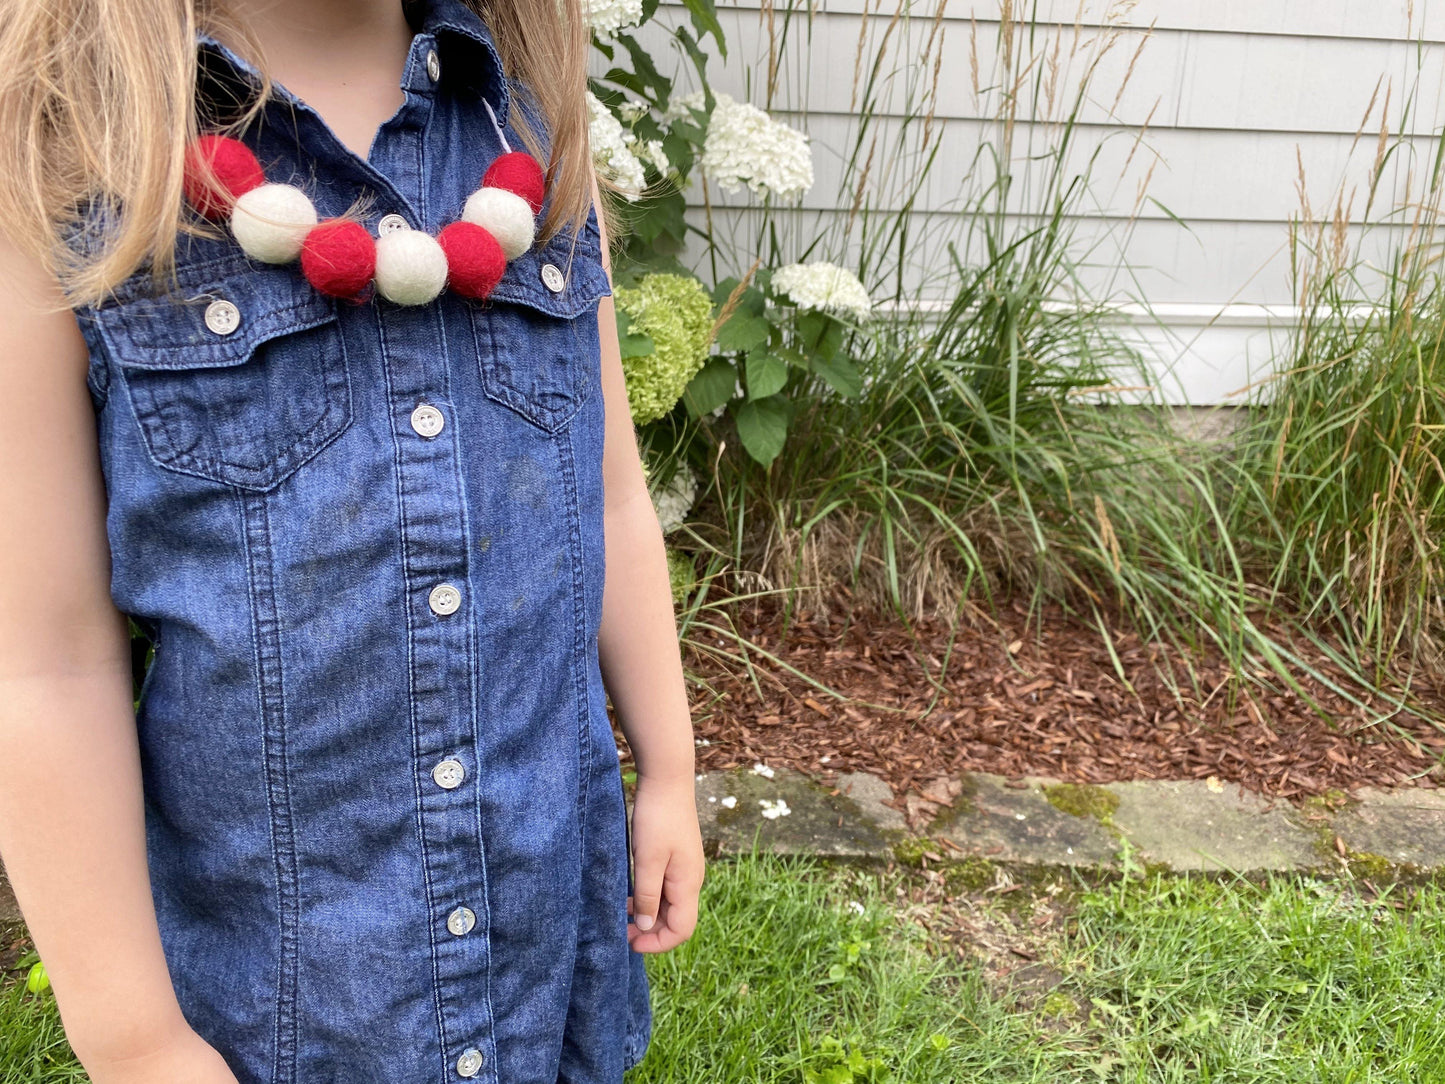 Red & White Felt Ball Necklace - Redheadnblue